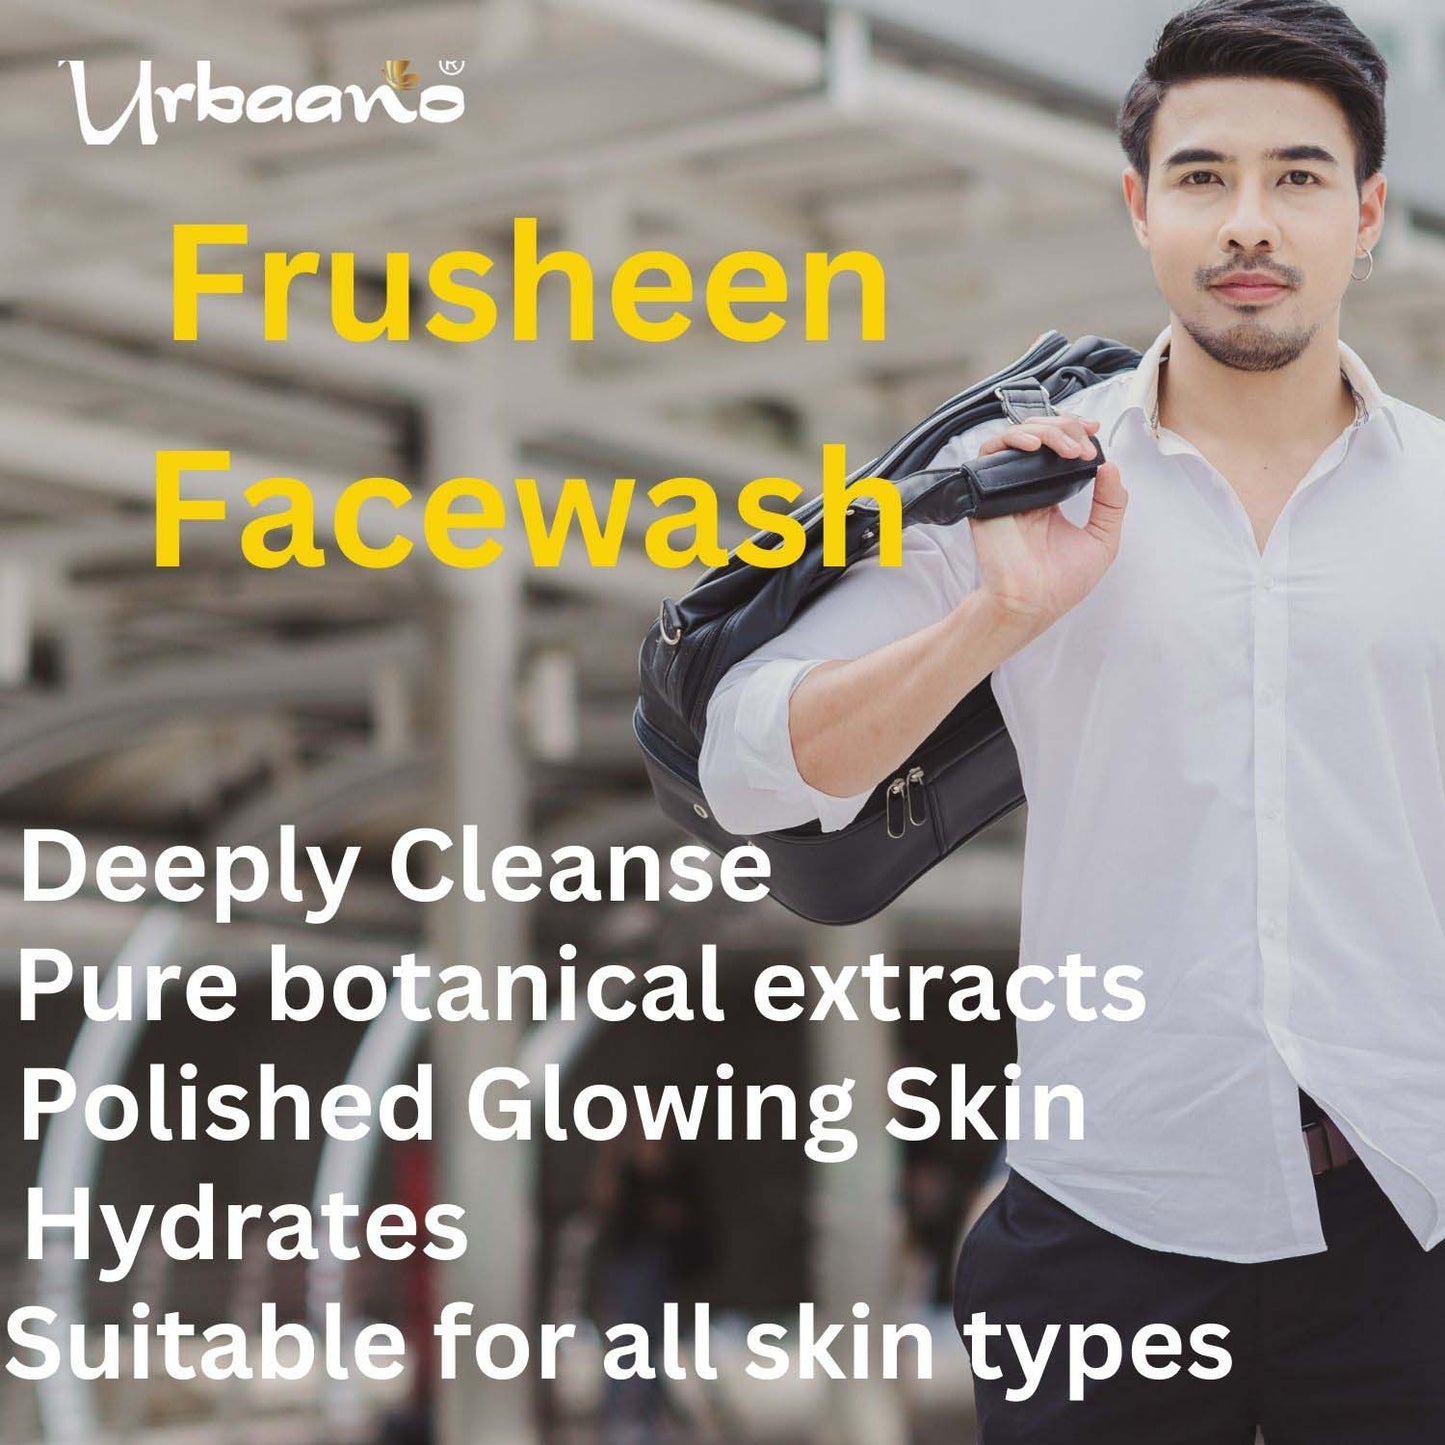 urbaano herbal active charcoal frusheen face wash cleanses, hydrates, brightens the skin